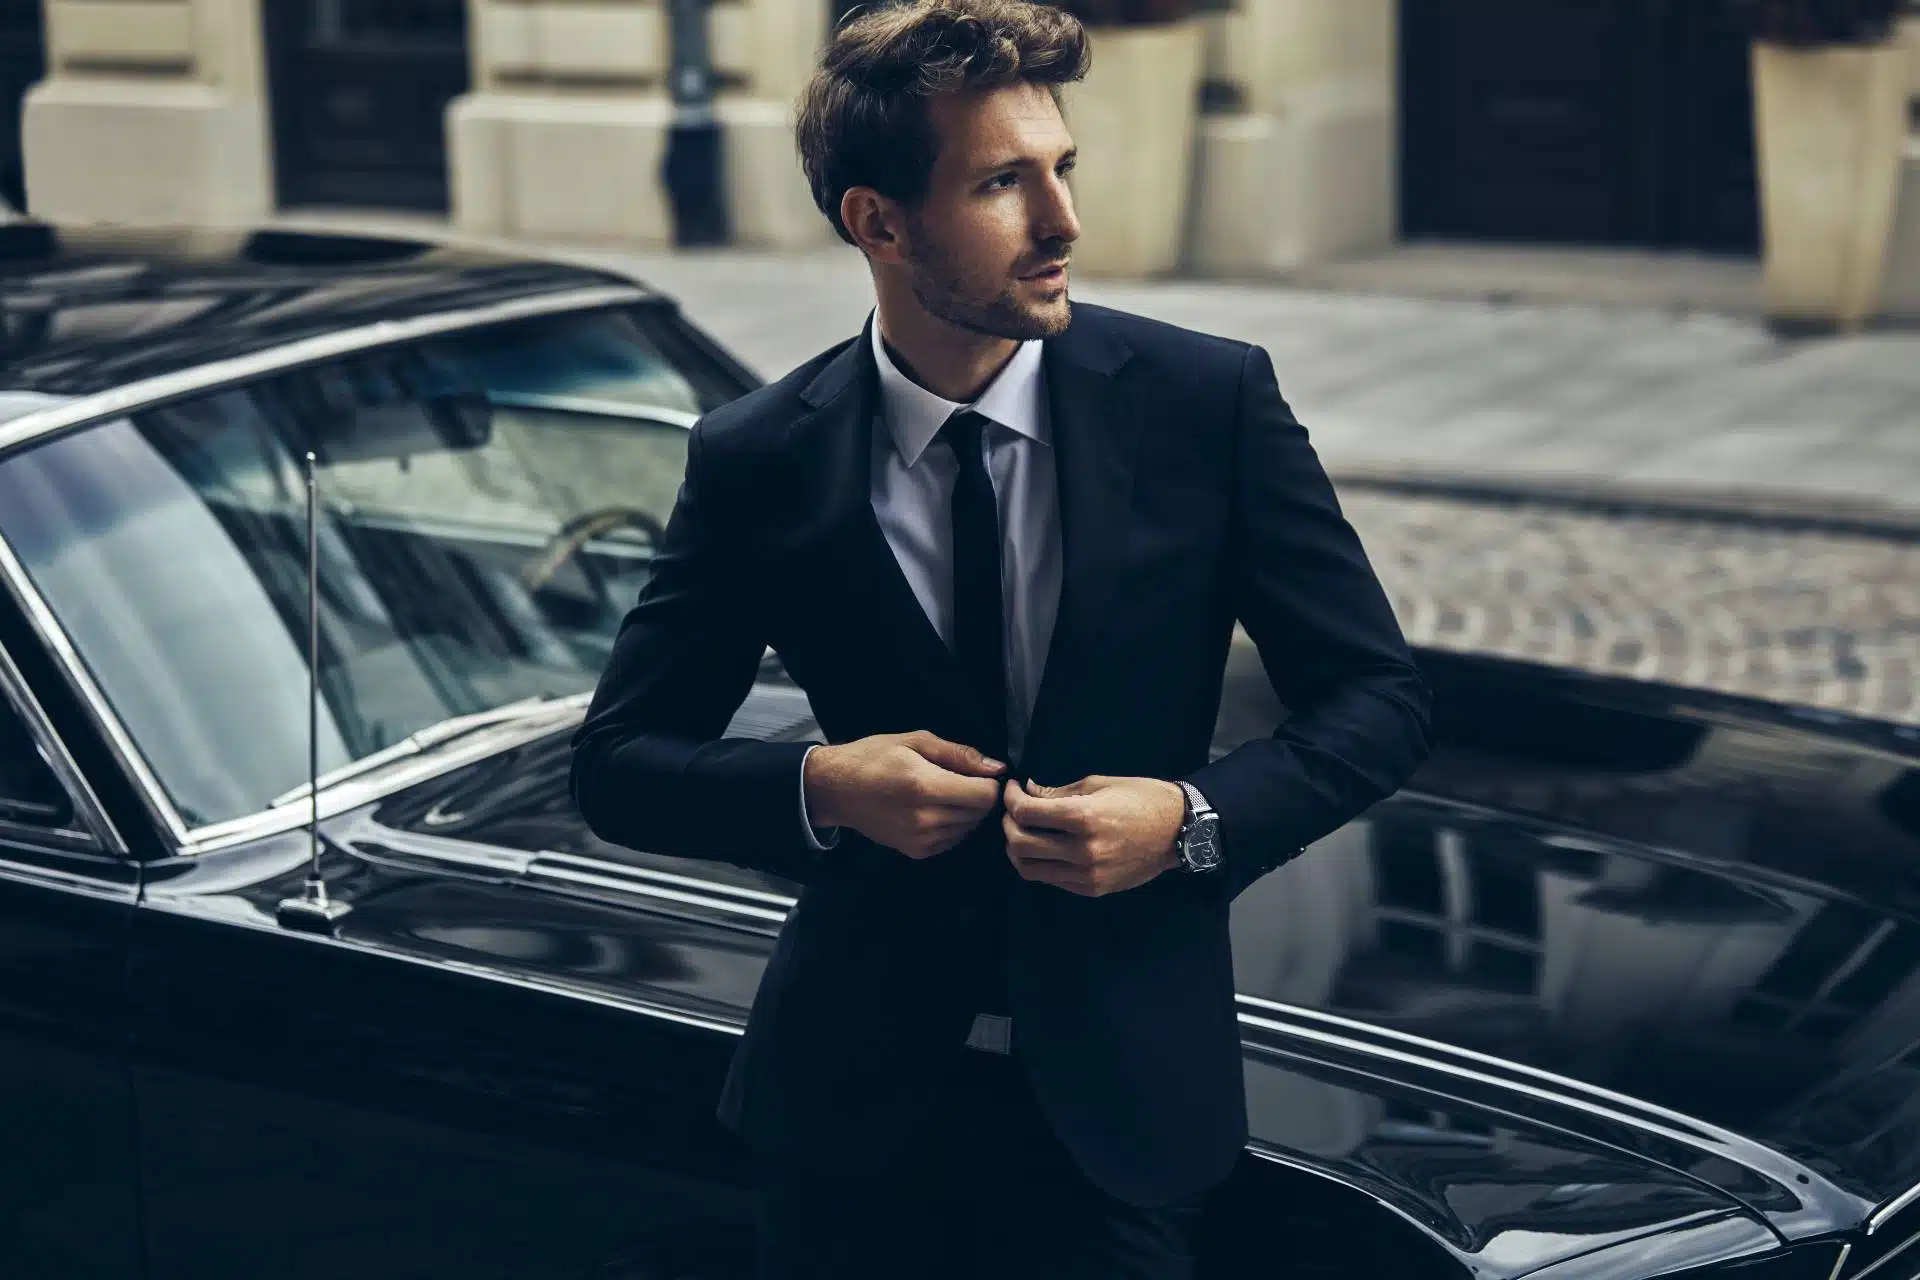 Effortless Outfits That Any Man Can Wear